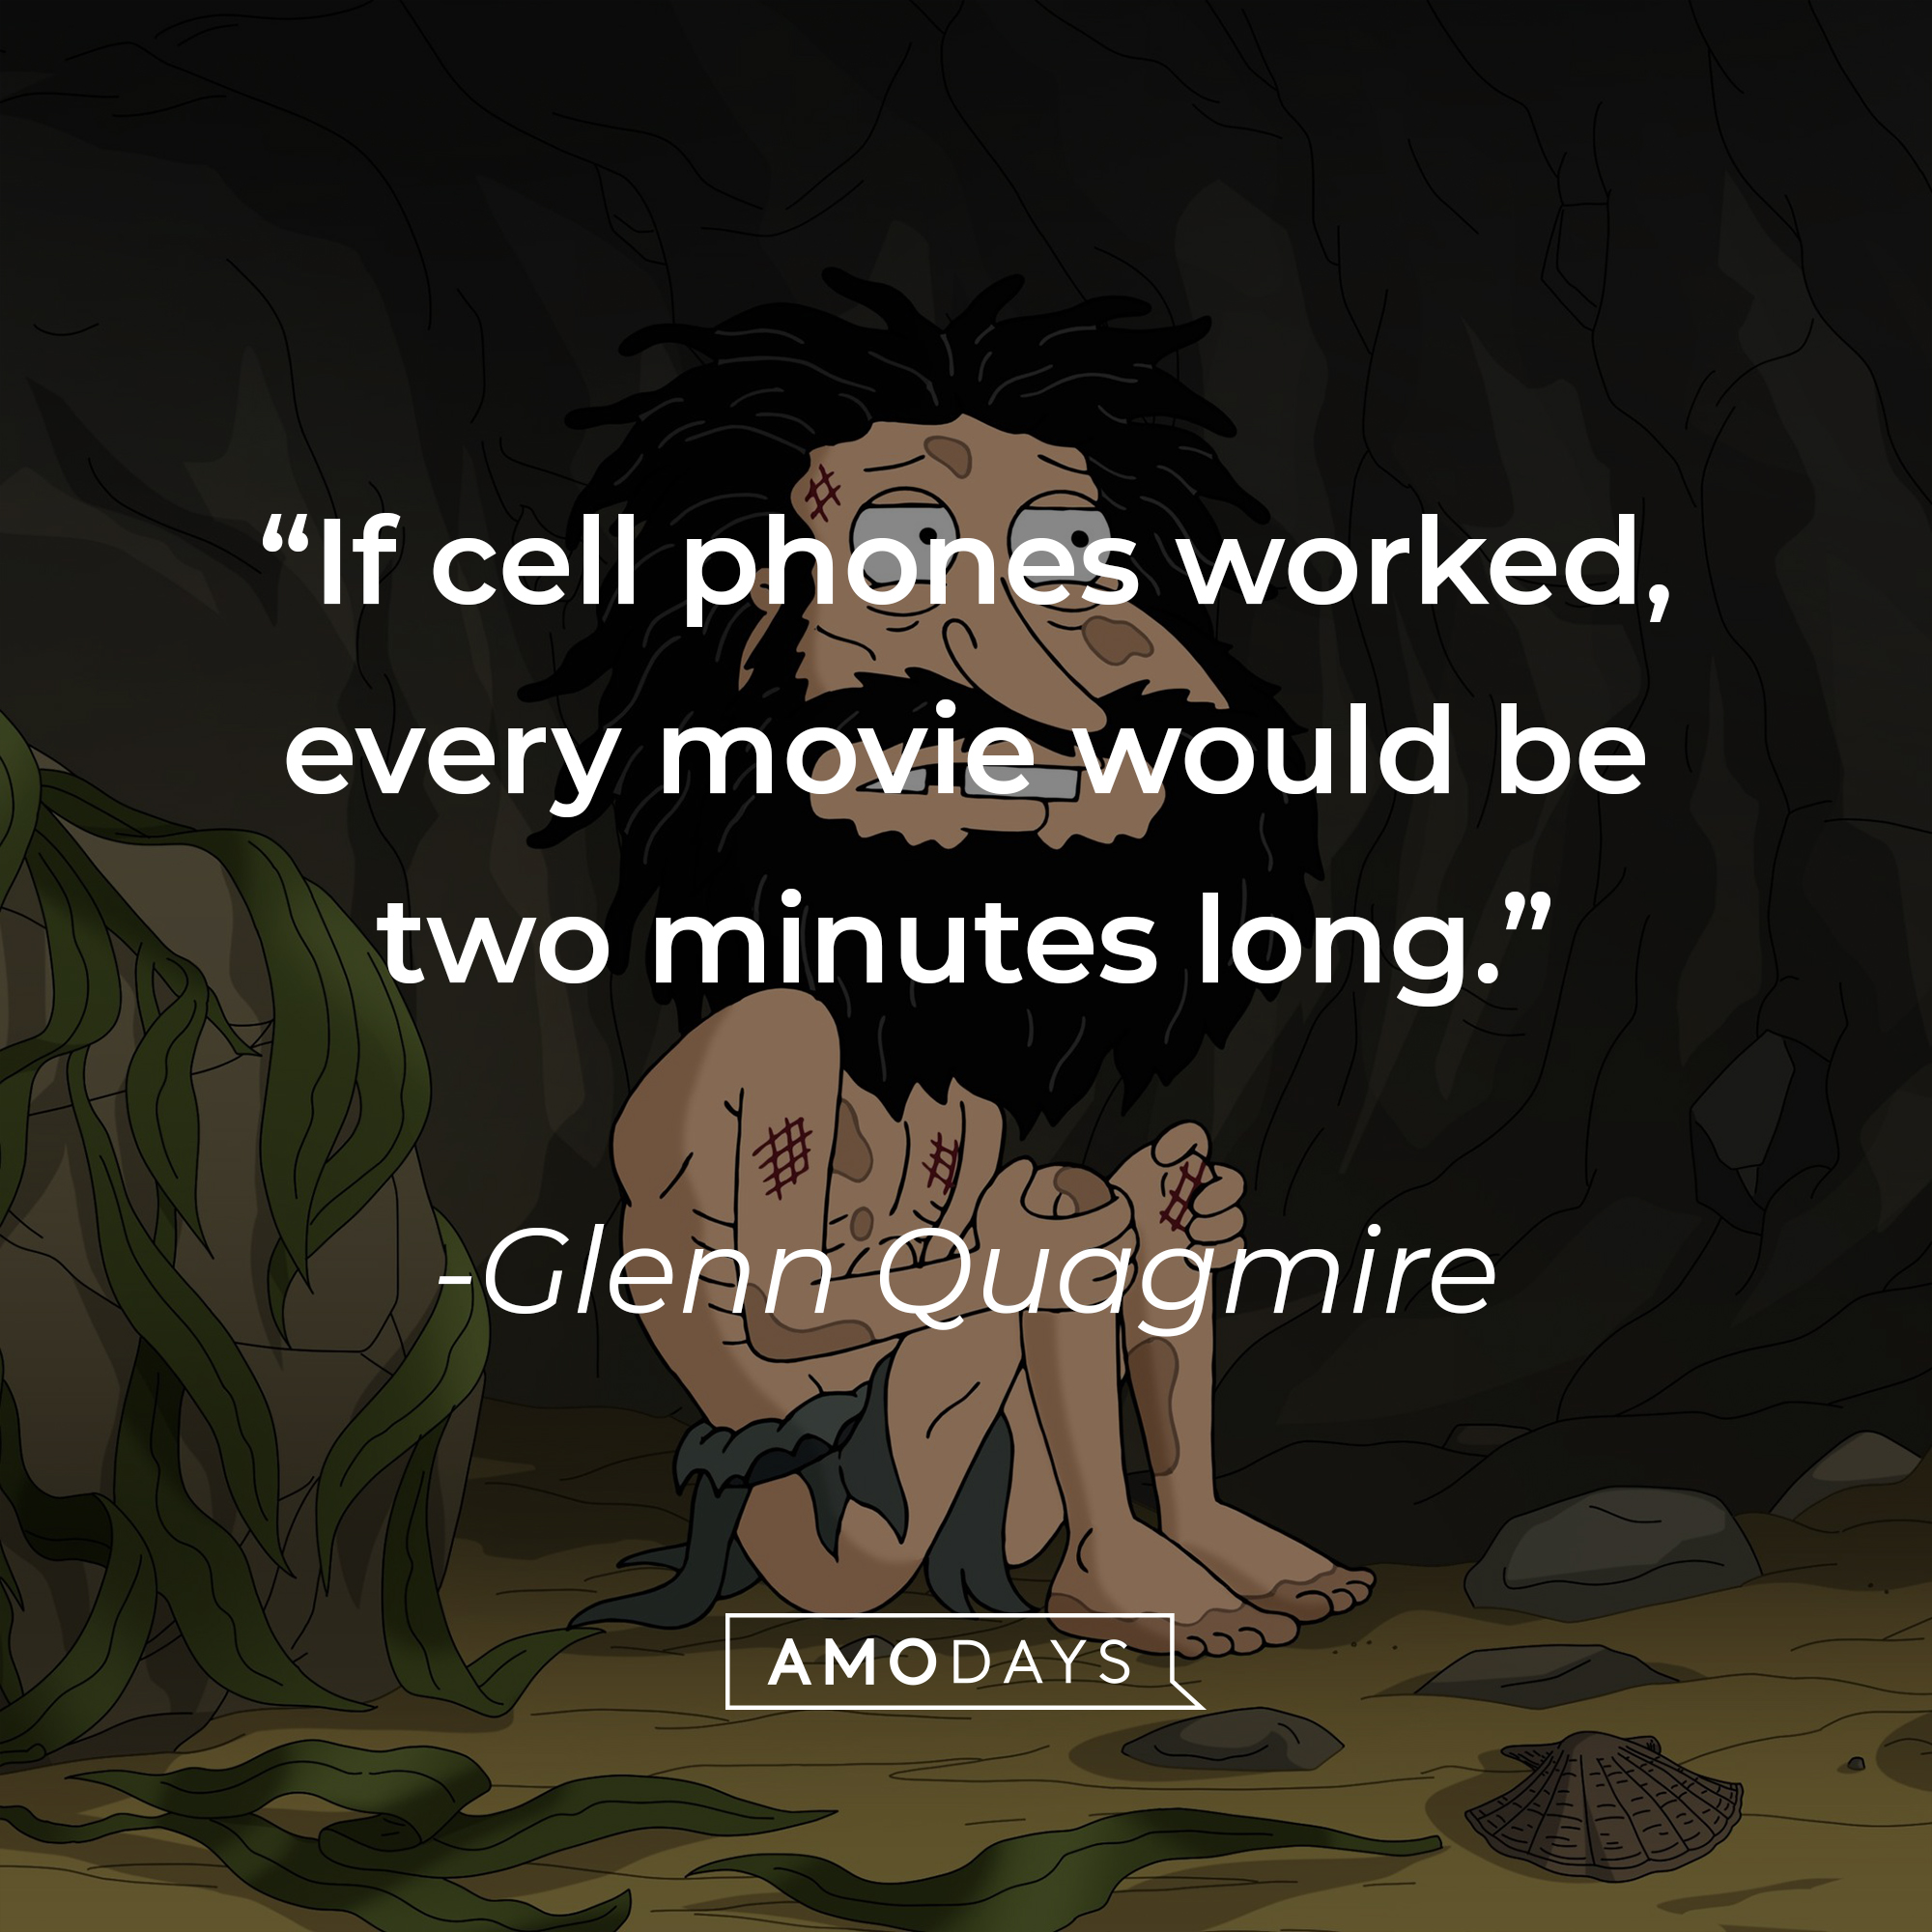 Glenn Quagmire with his quote: “If cell phones worked, every movie would be two minutes long.” | Source: facebook.com/FamilyGuy